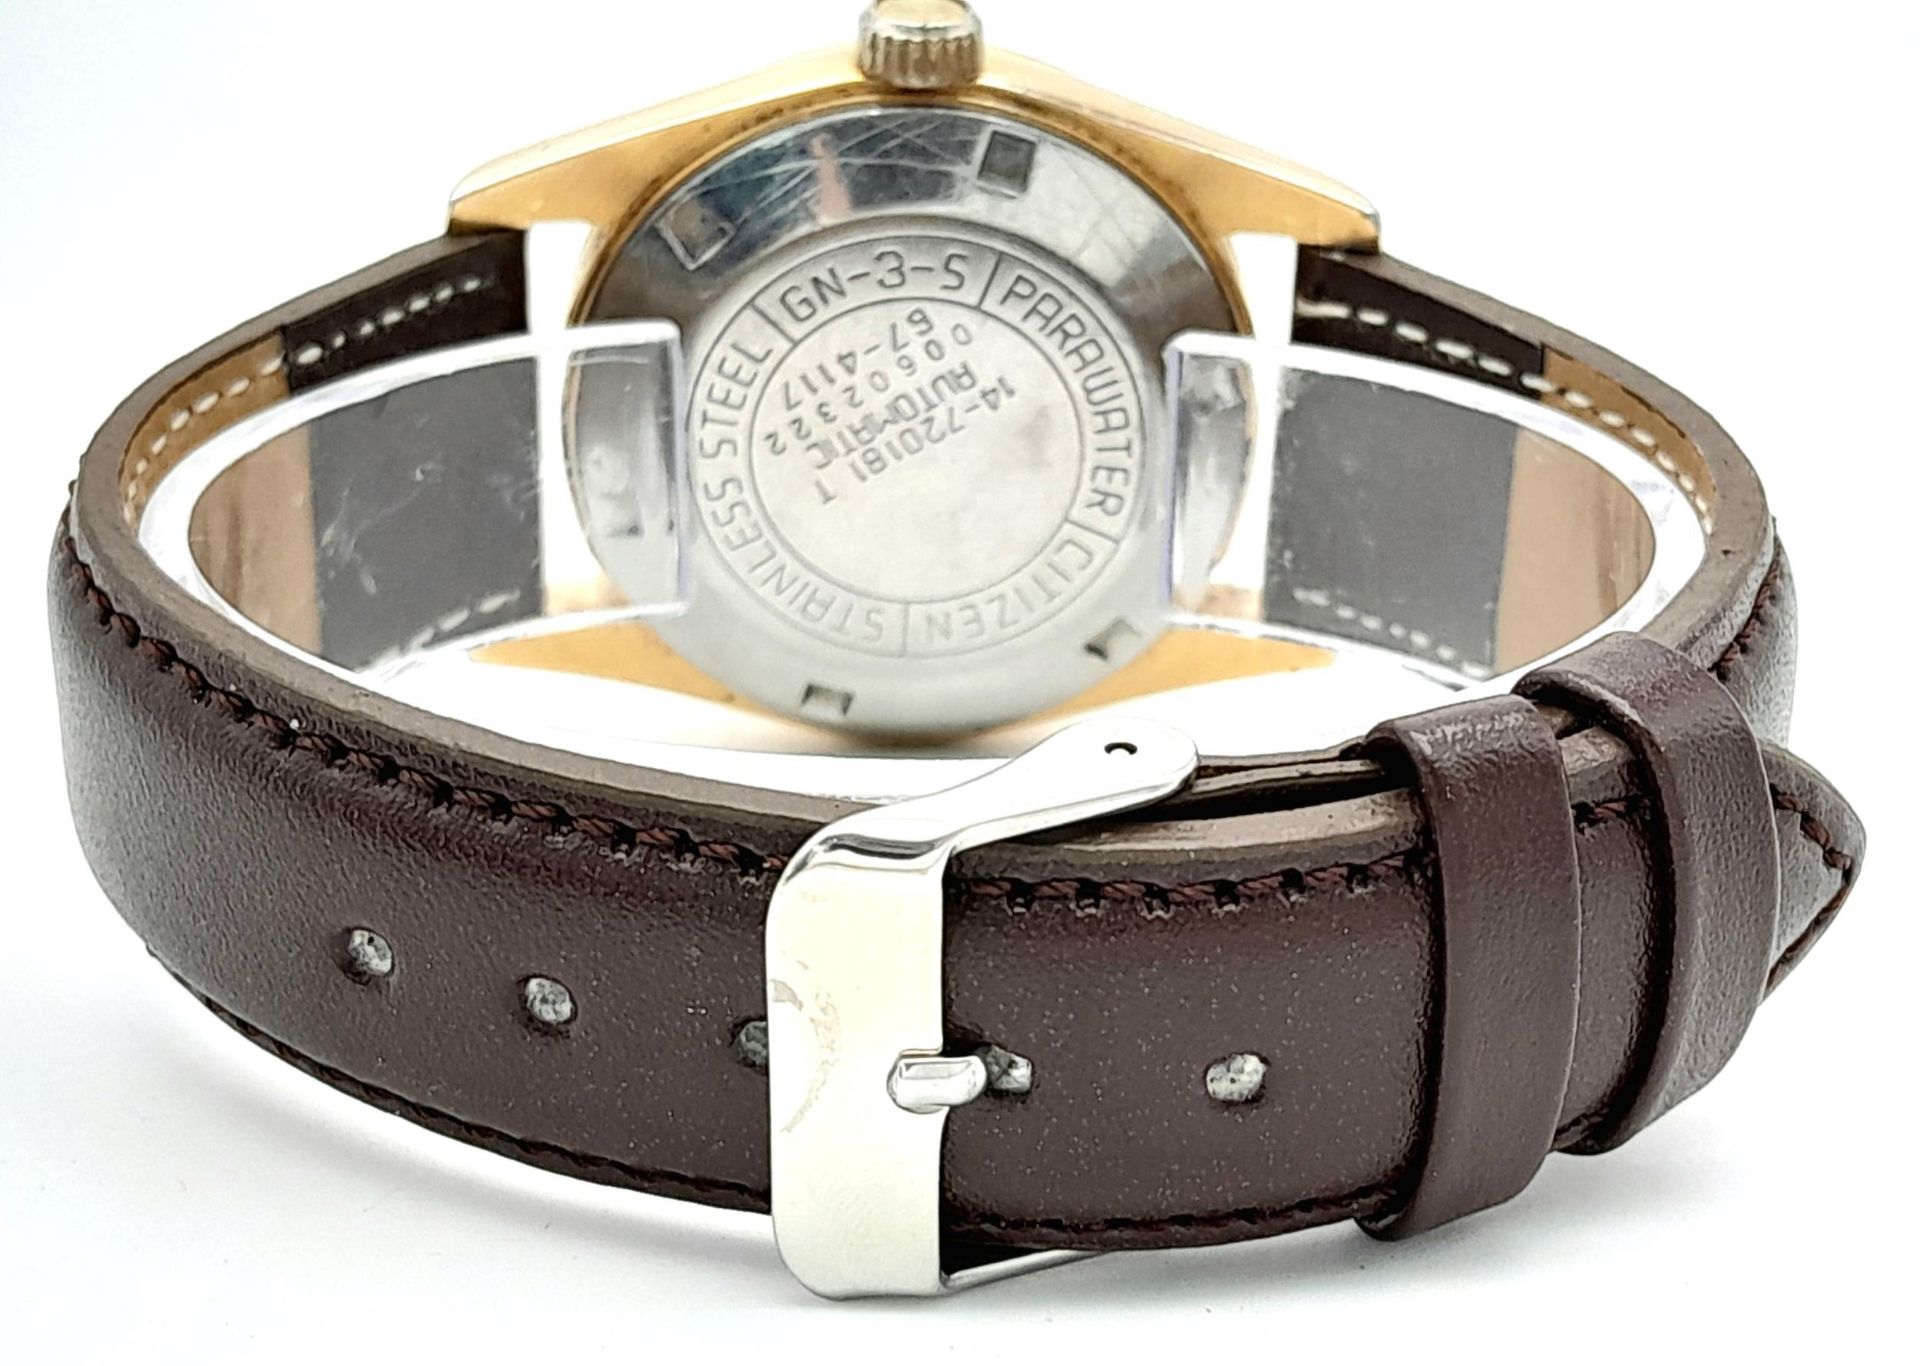 A Citizen Automatic Stone Set Watch. Brown leather strap. Gold plated case - 36mm. Gold tone dial - Bild 4 aus 6